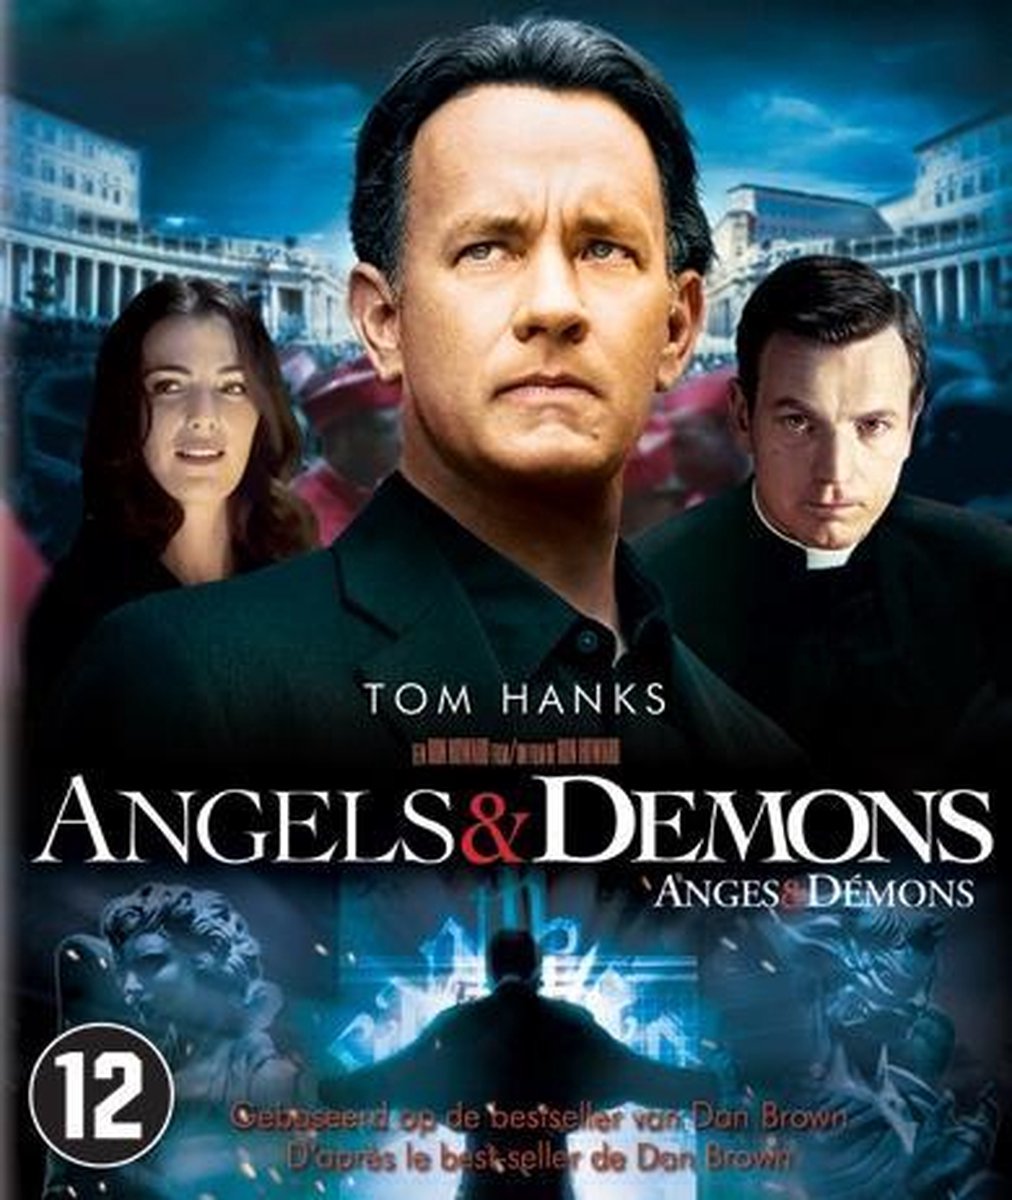 Angels and Demons (Blu-ray), Ron Howard